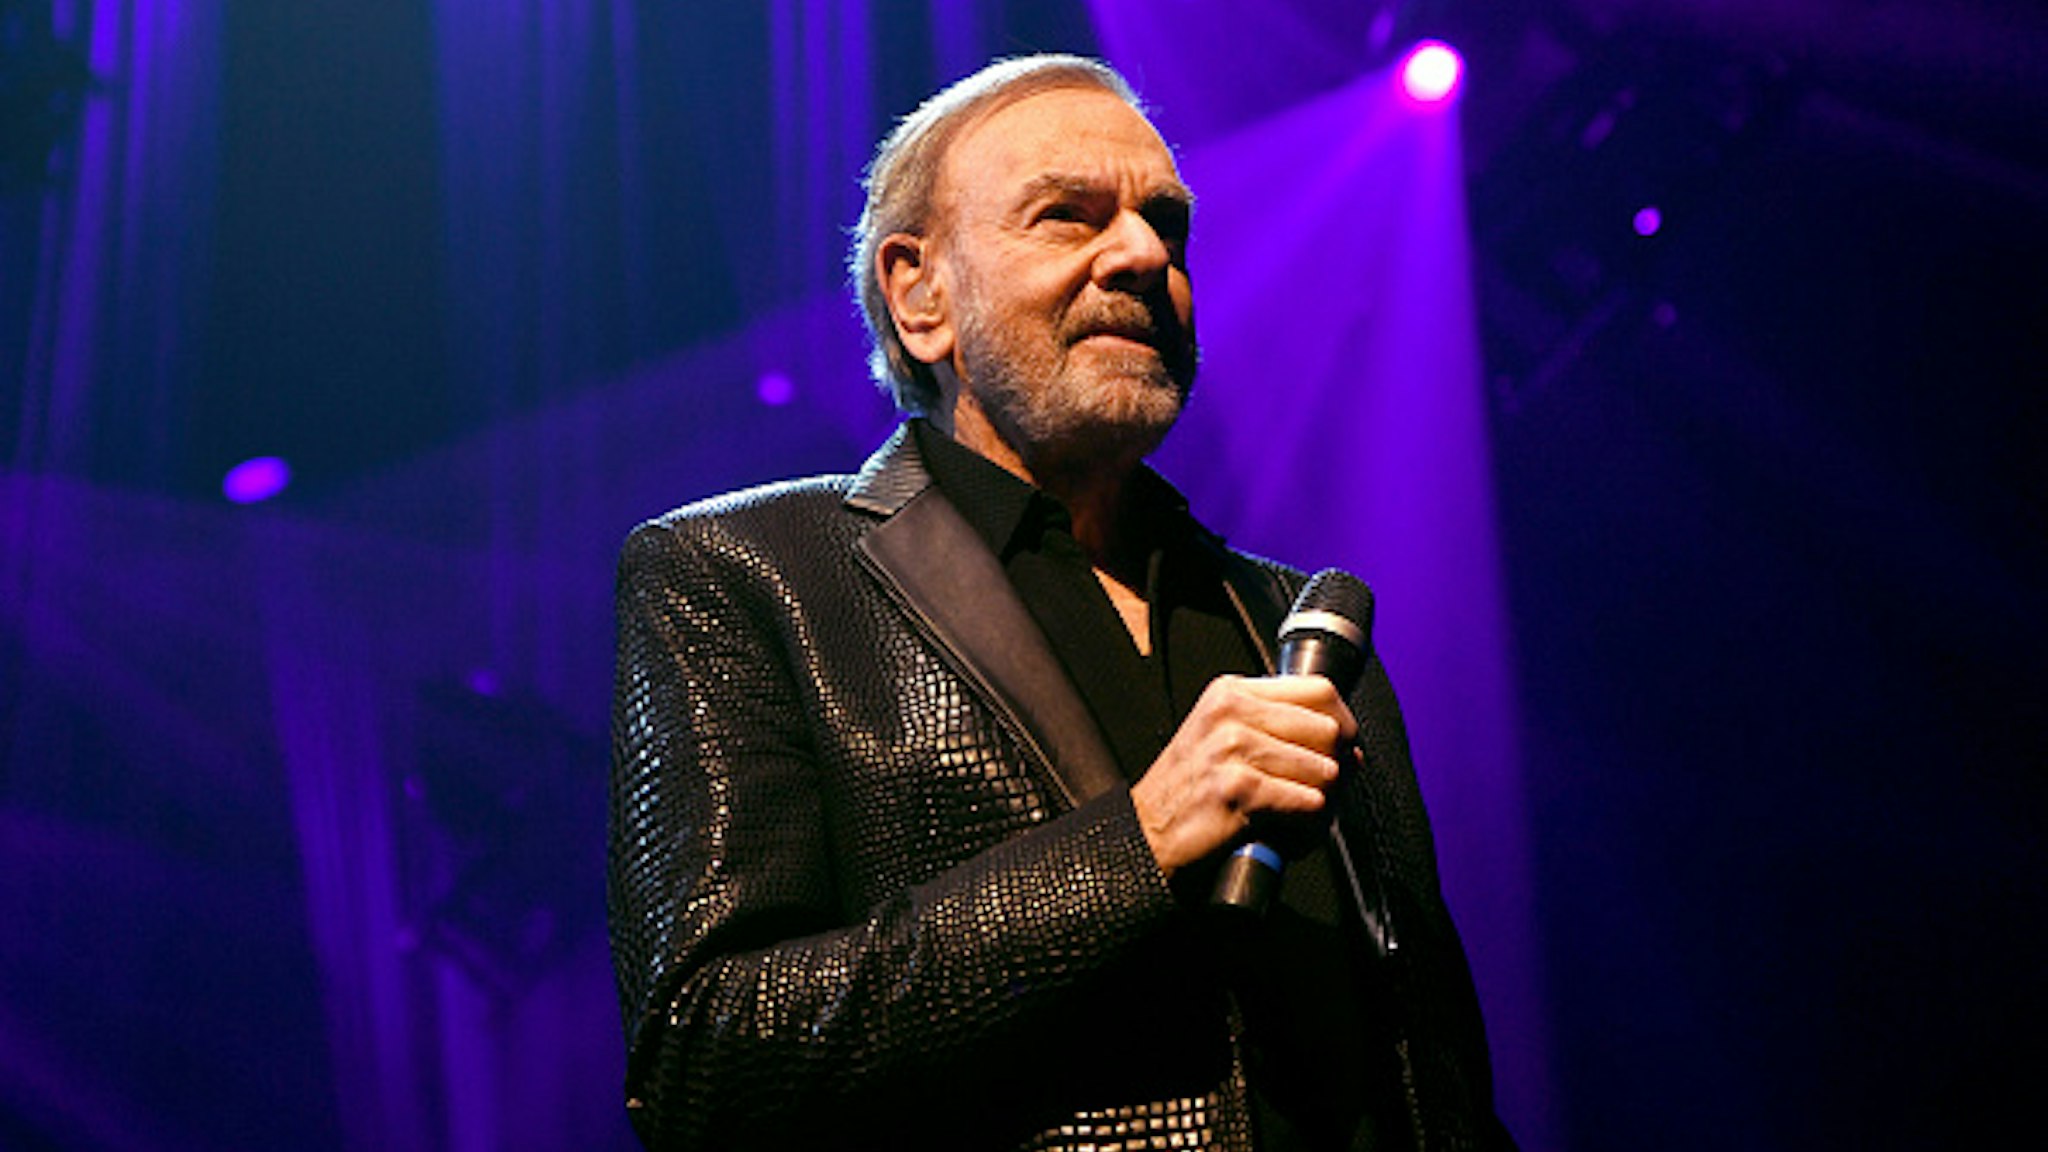 LAS VEGAS, NEVADA - MARCH 07: Neil Diamond performs onstage at the 24th annual Keep Memory Alive 'Power of Love Gala' benefit for the Cleveland Clinic Lou Ruvo Center for Brain Health at MGM Grand Garden Arena on March 07, 2020 in Las Vegas, Nevada